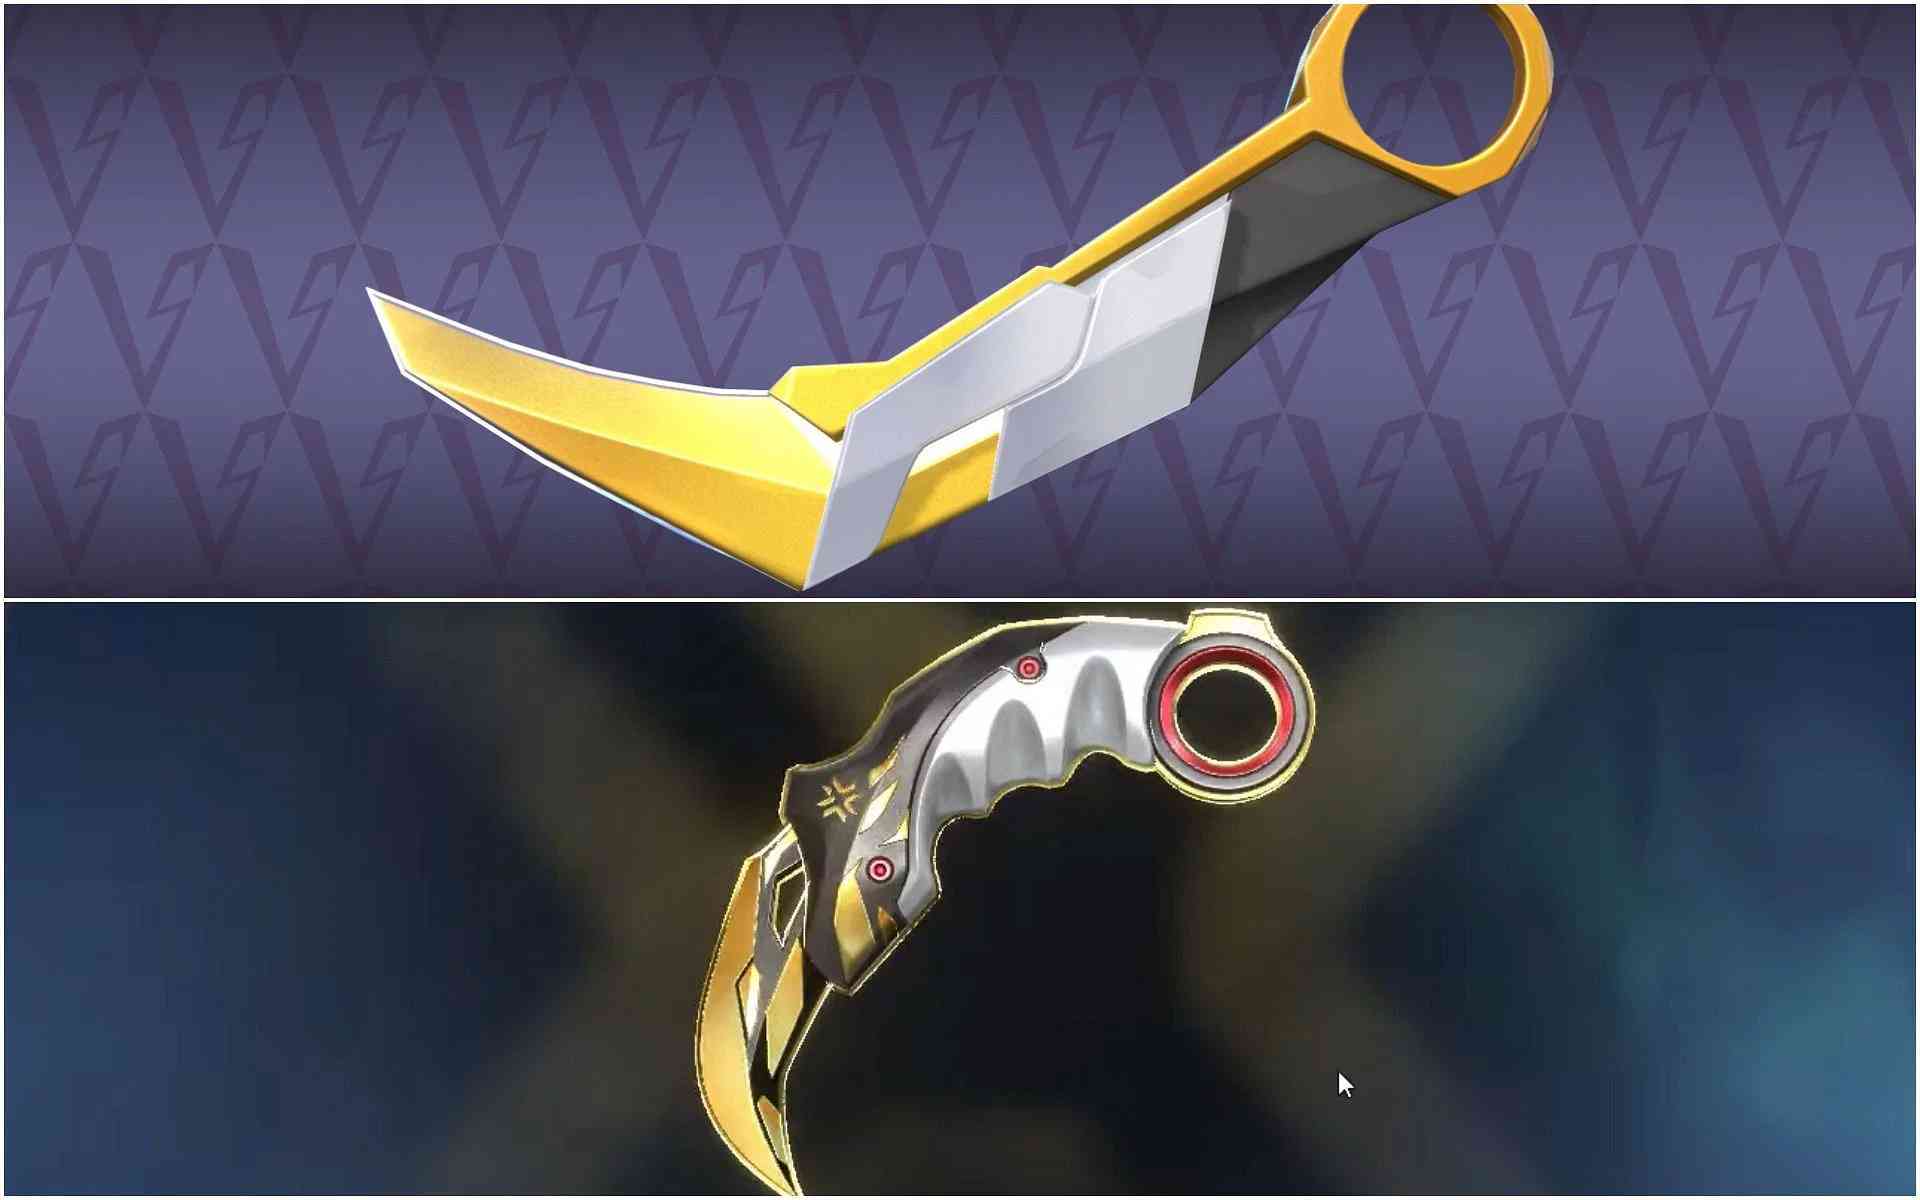 The Prime 2.0 Karambit knife skin has a classic, gold chrome finish that makes it one of Valorant's most popular skins